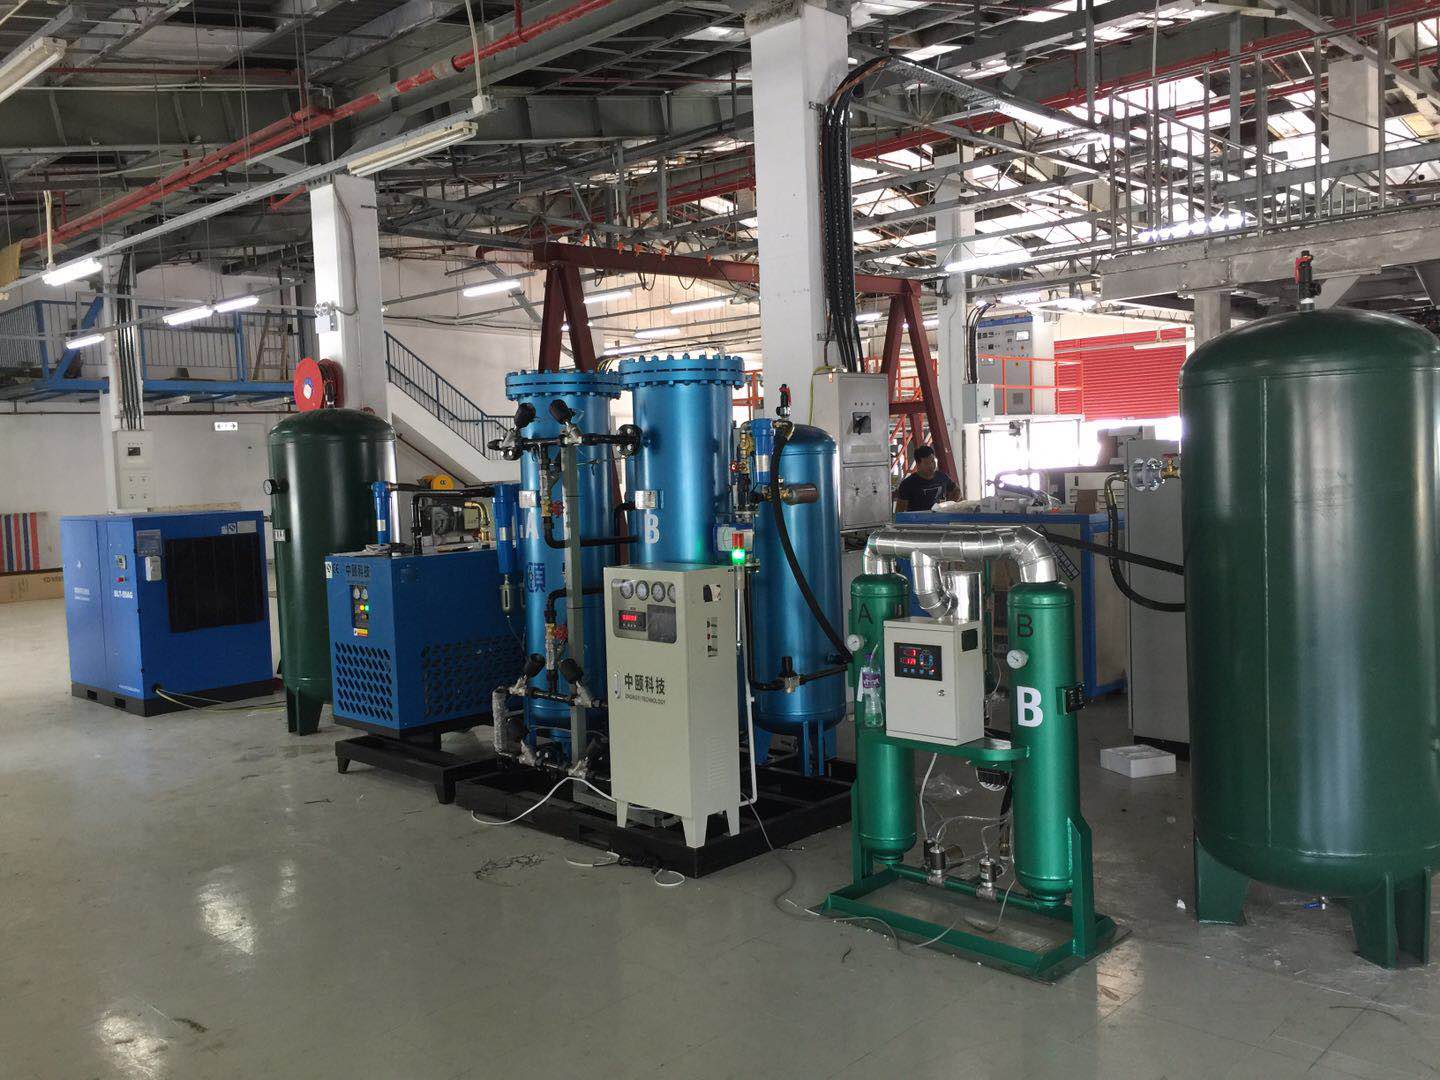 Exported to Hong Kong a factory full set of high pure nitrogen equipment start-up operation